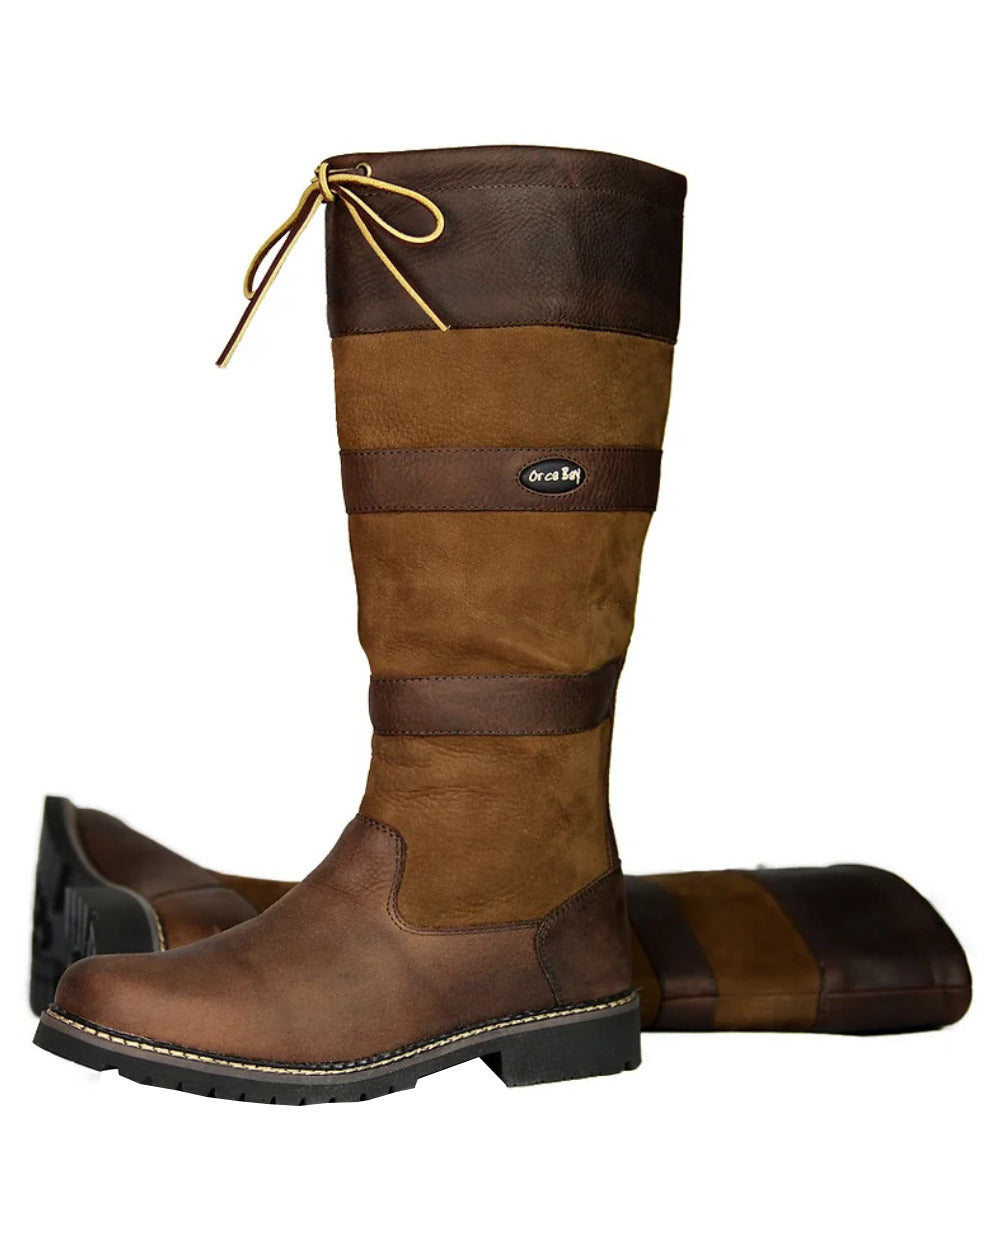 Orca Bay Orkney S-Fit Country Boots